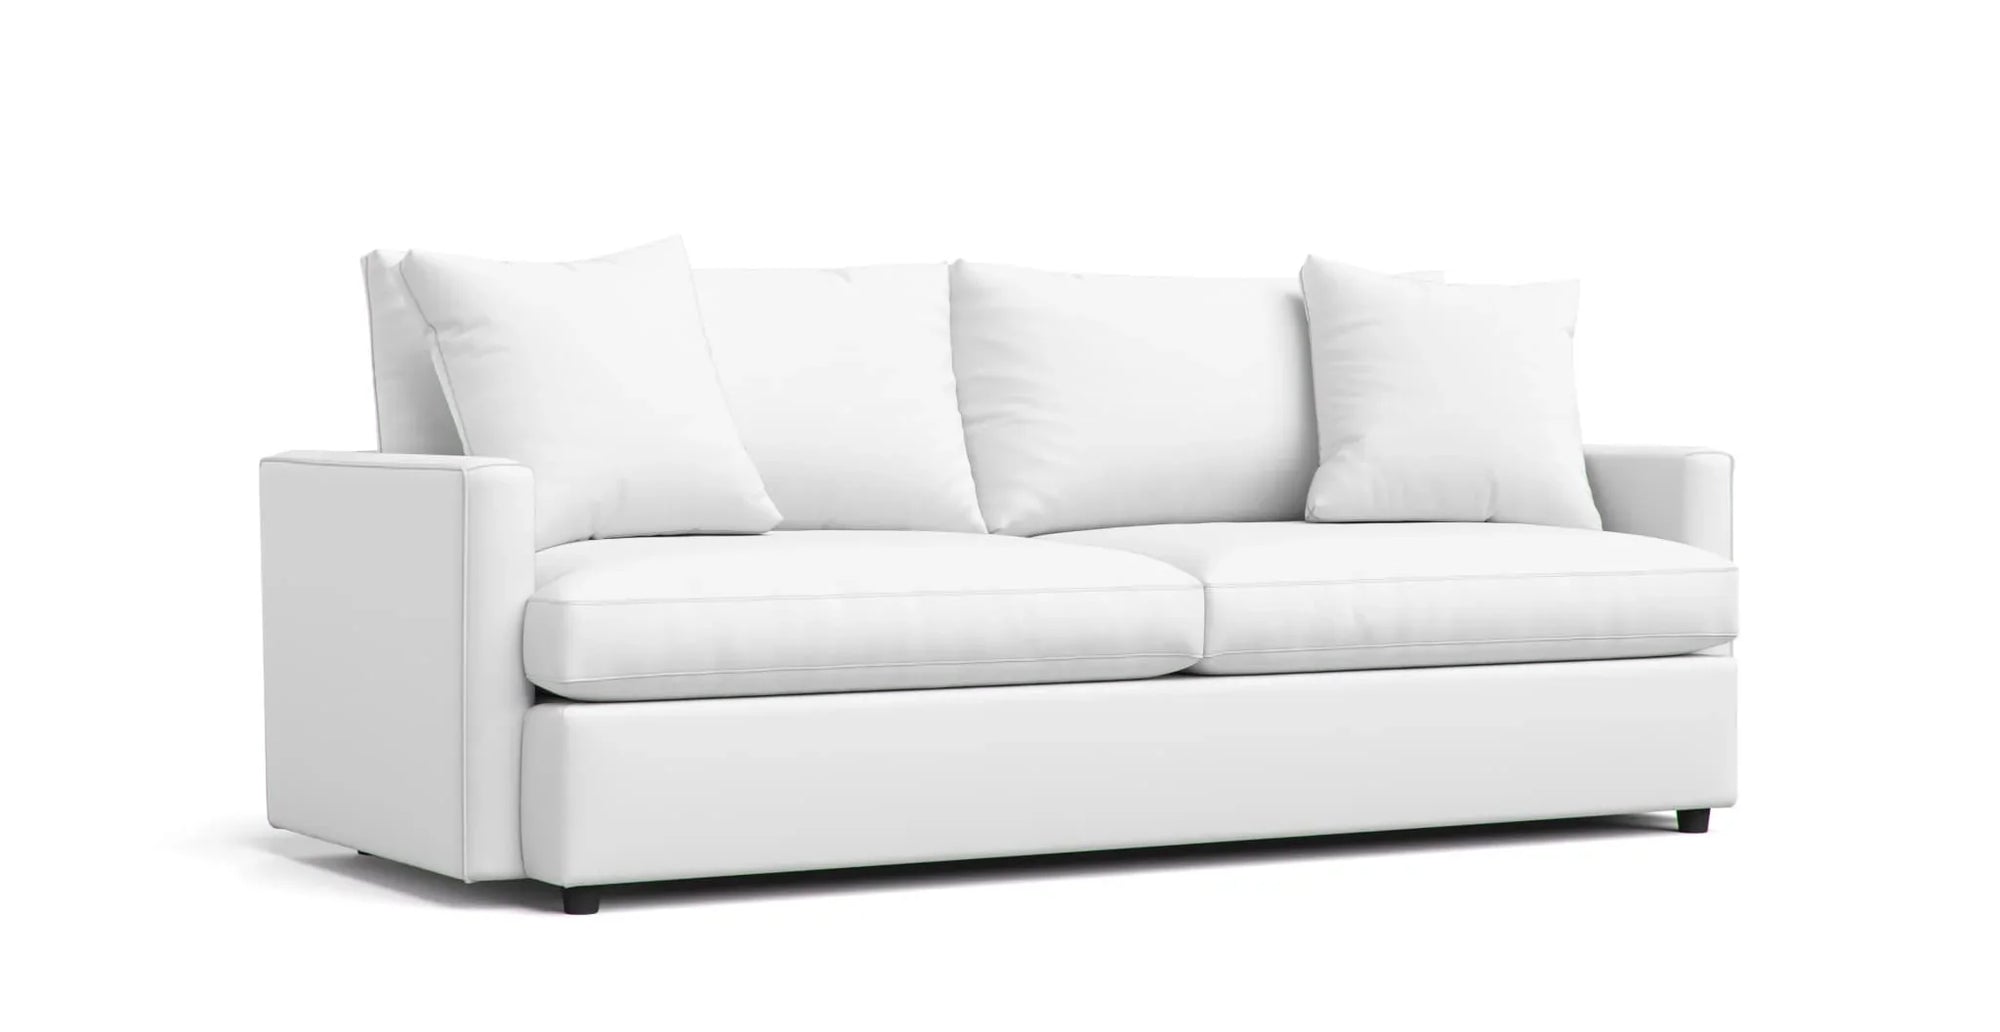 Crate and Barrel Lounge II sofa featuring white Cotton Canvas slipcover